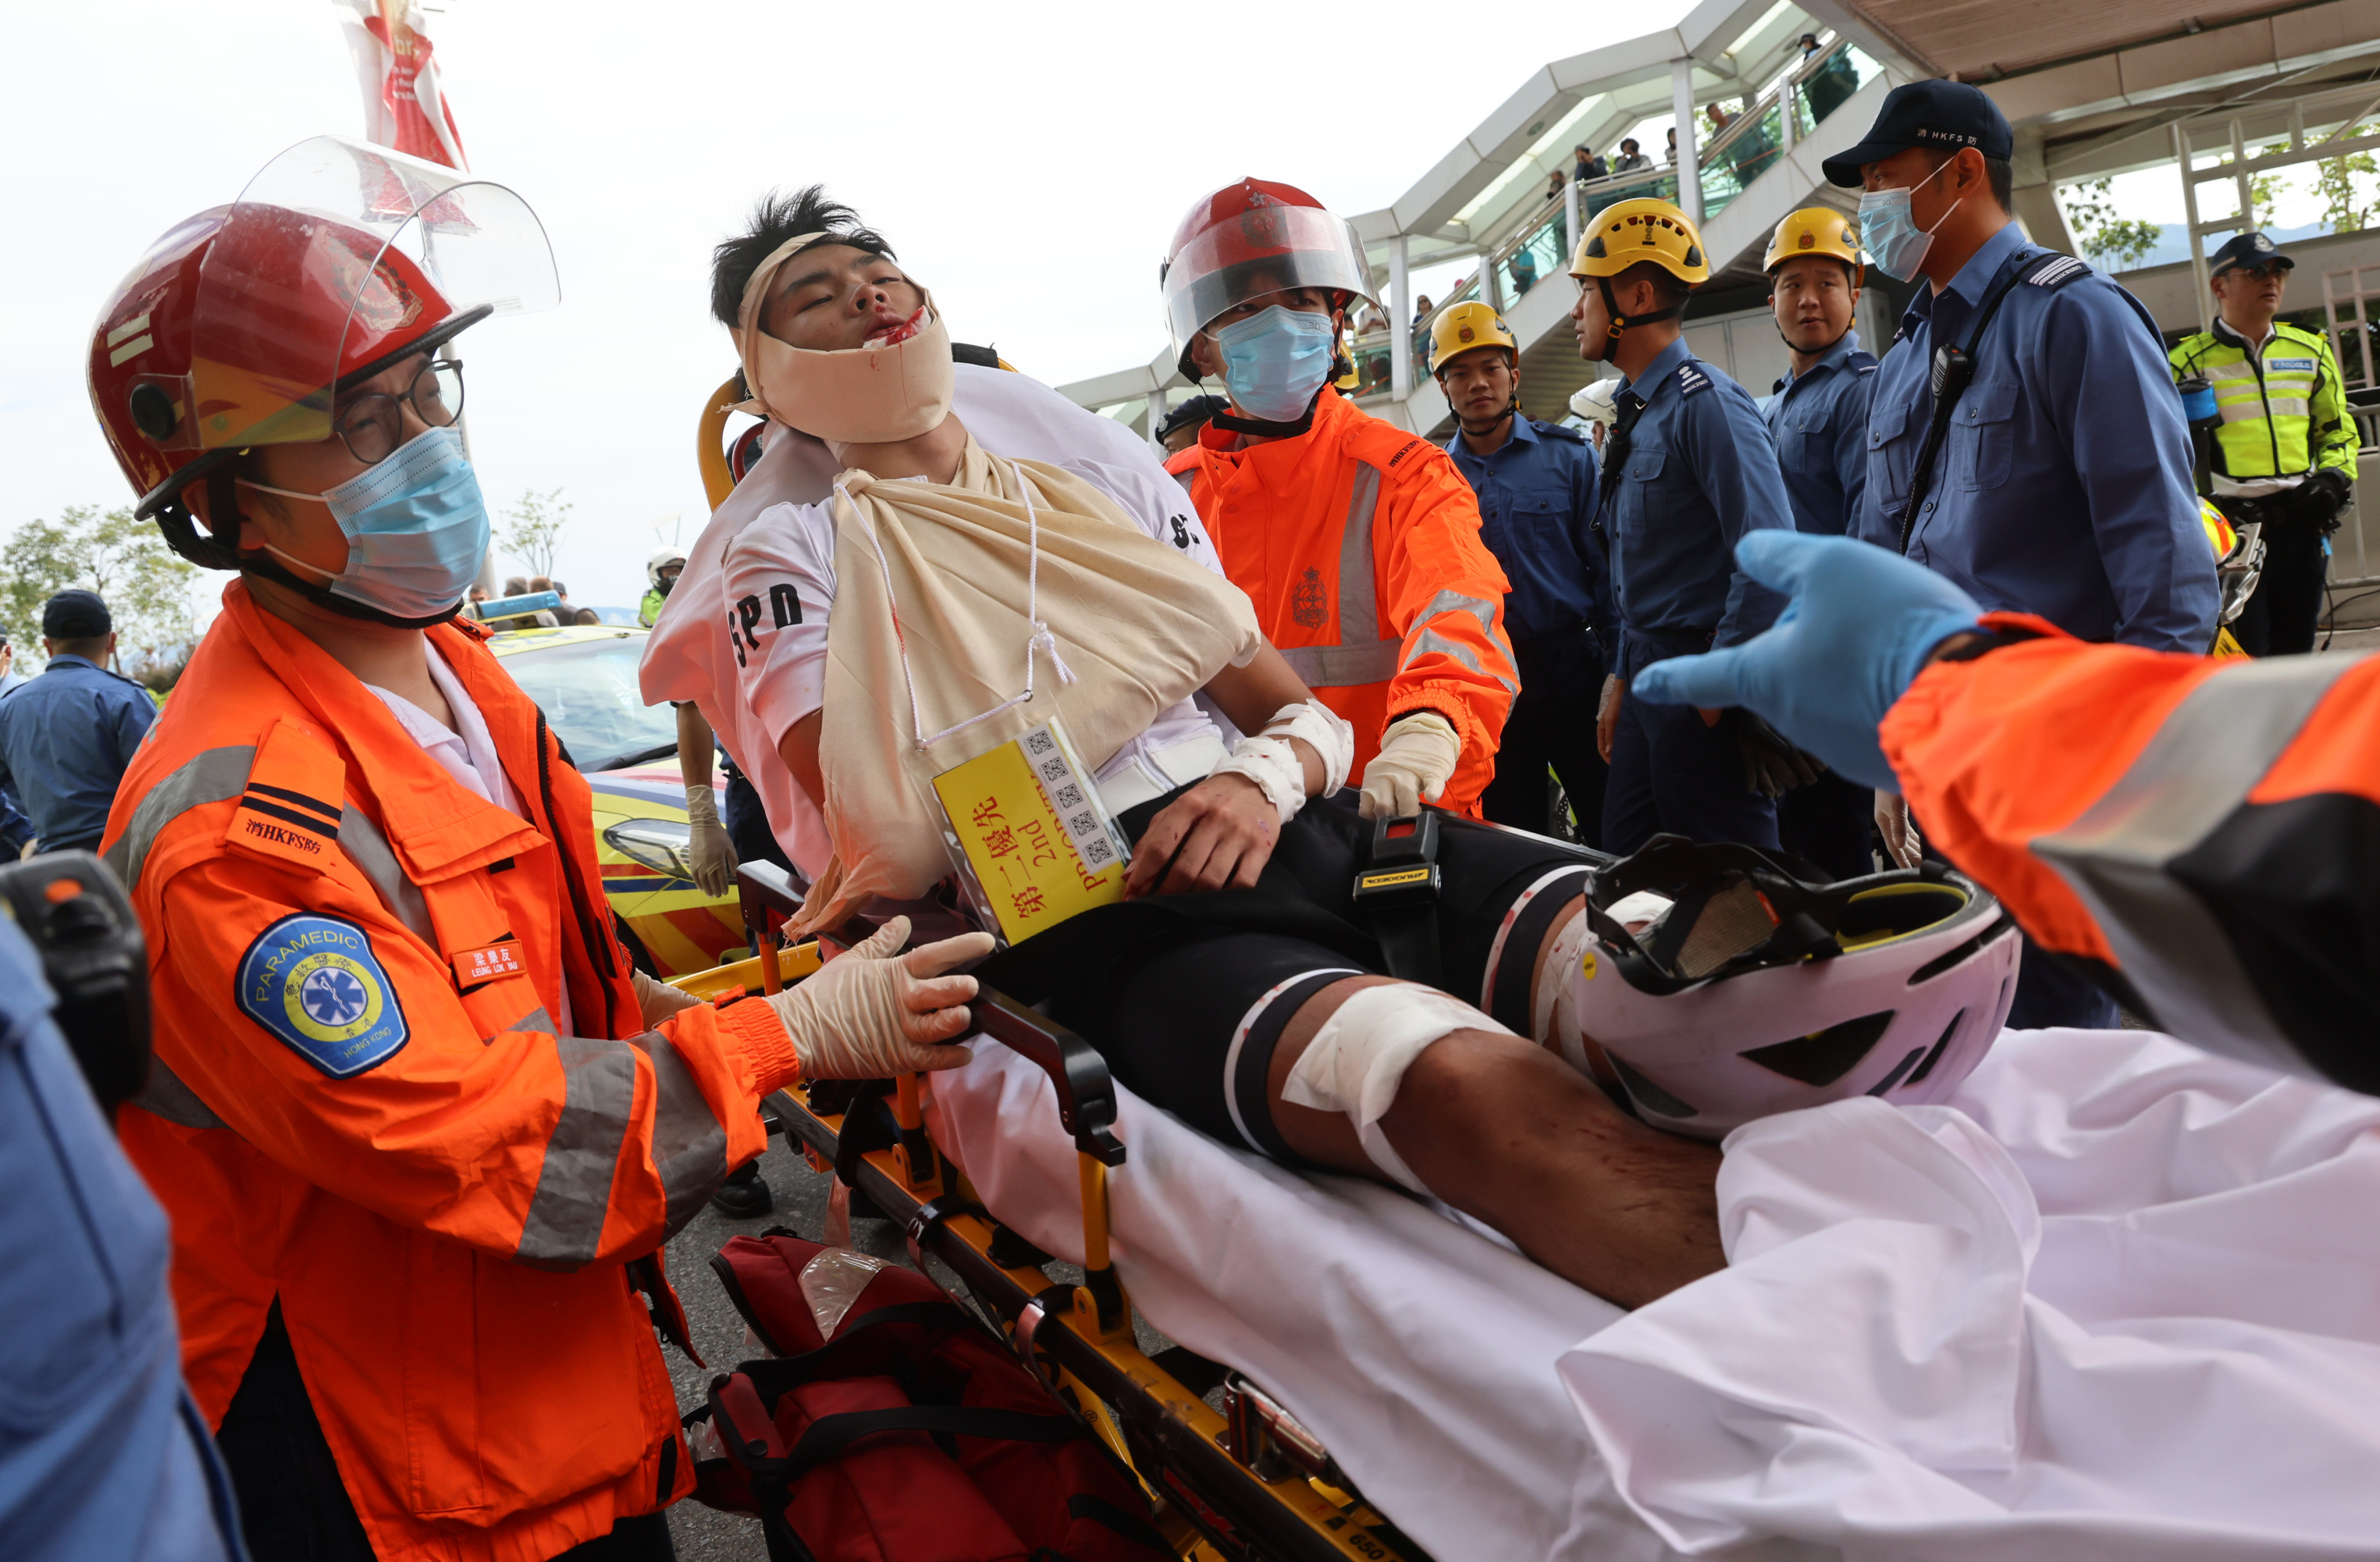 Injured riders were sent to hospital after Sunday’s accident. Photo: Dickson Lee